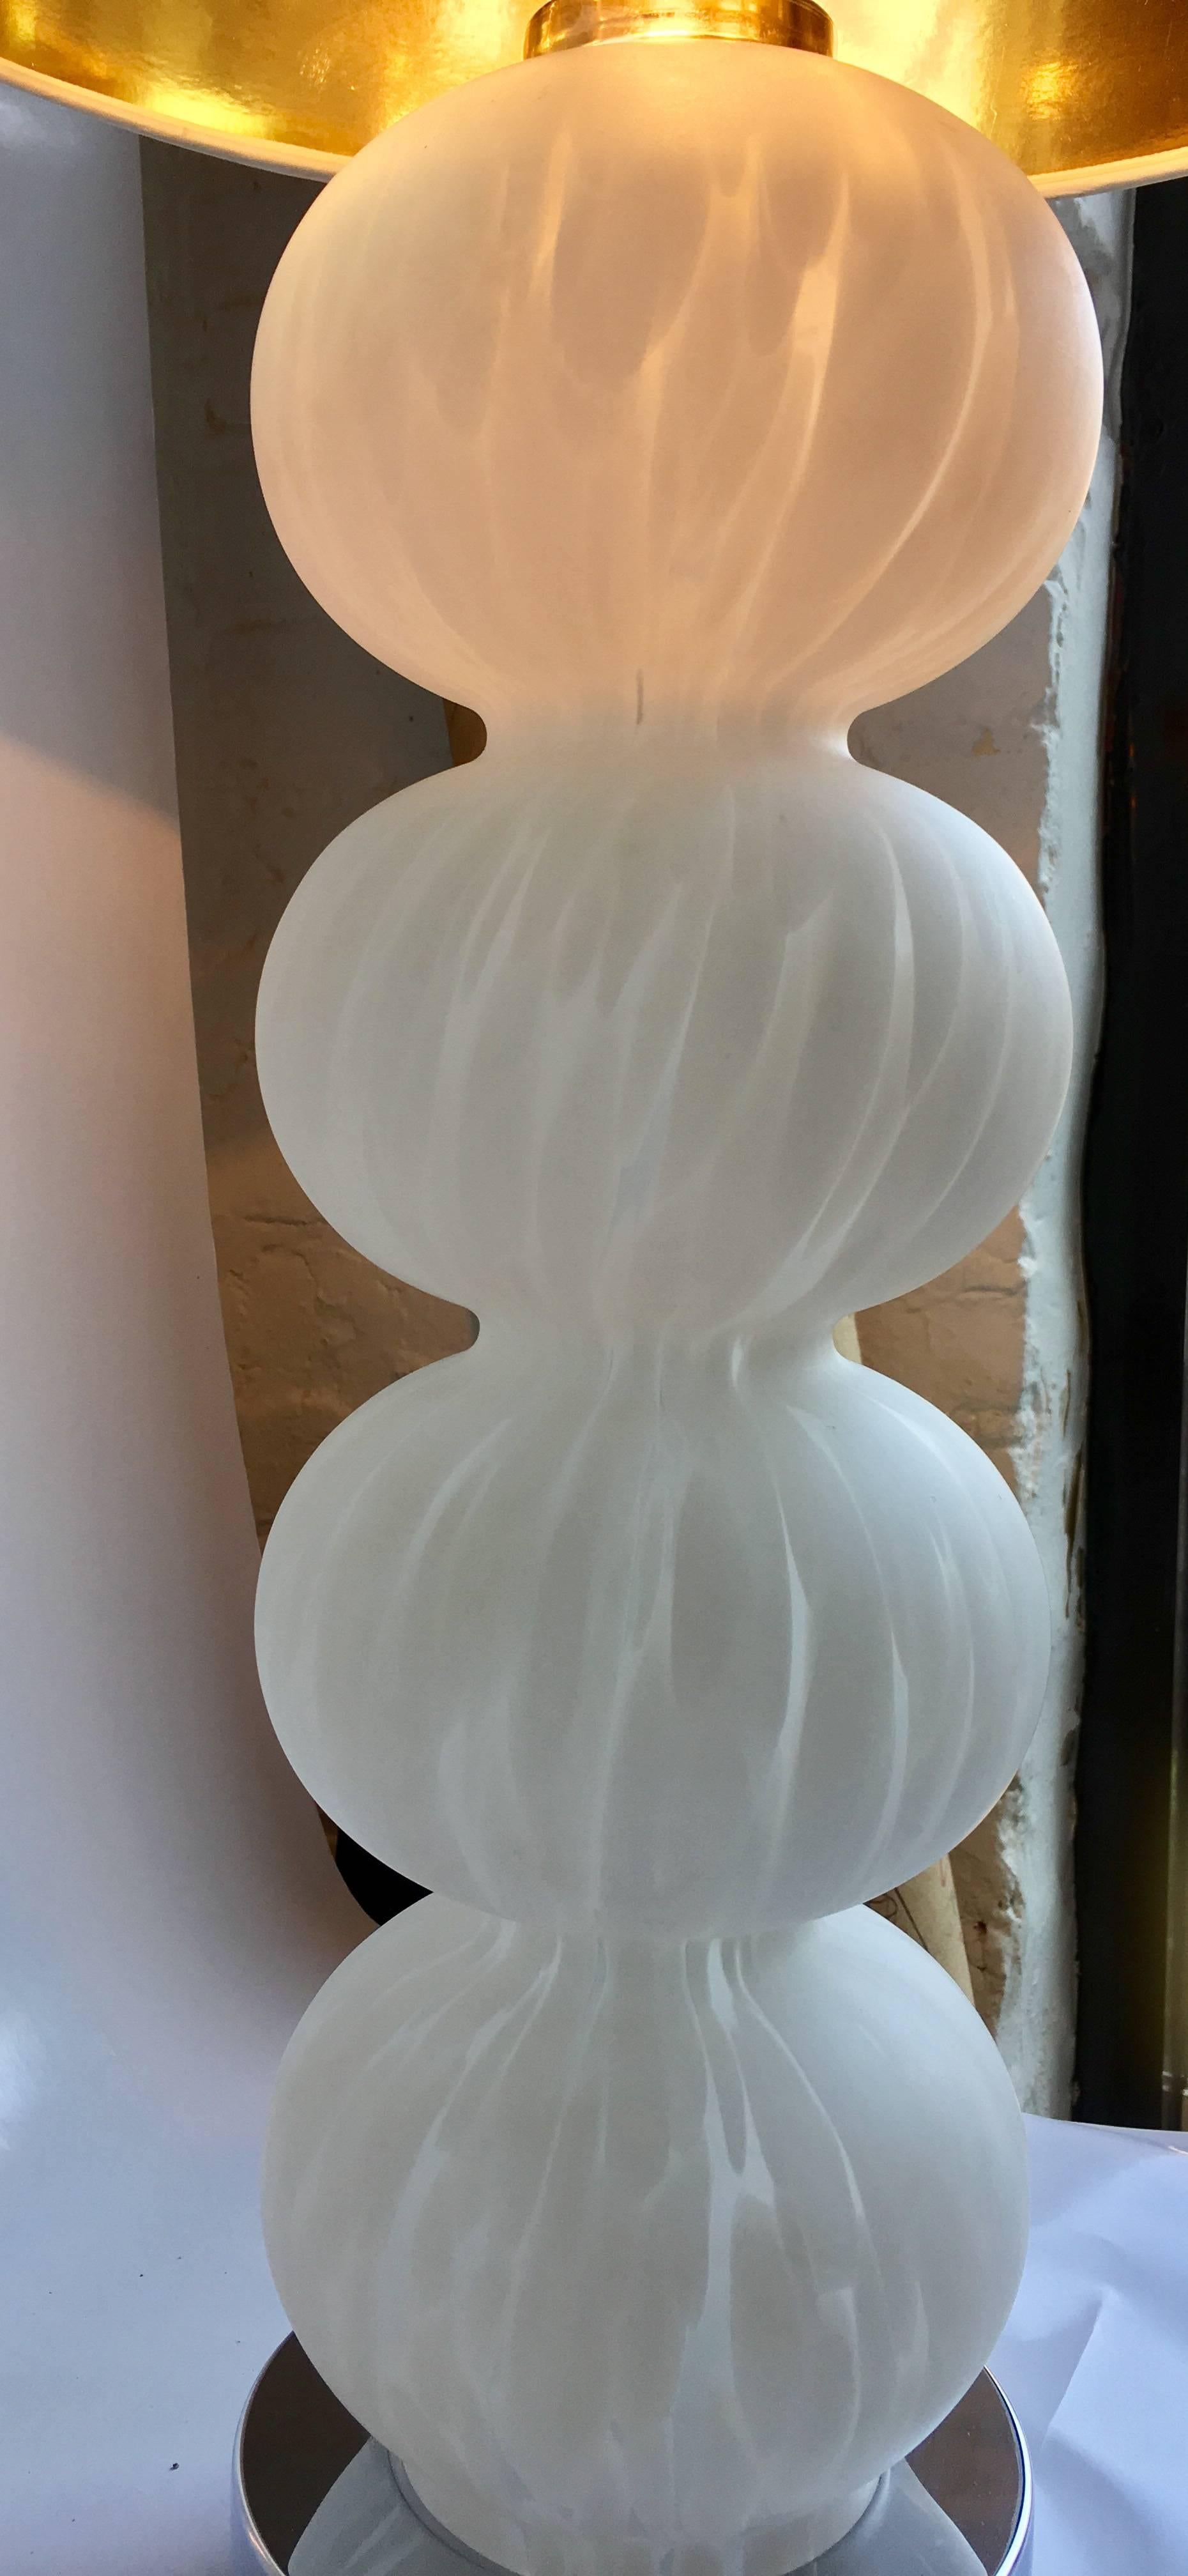 Mid-Century Modern white mottled frosted Murano style glass table lamp. This Vistosi style lamp features four sculptural curved spheres mounted on a chrome base. lampshade not included. Original wiring in working condition. 

Height to harp: 30